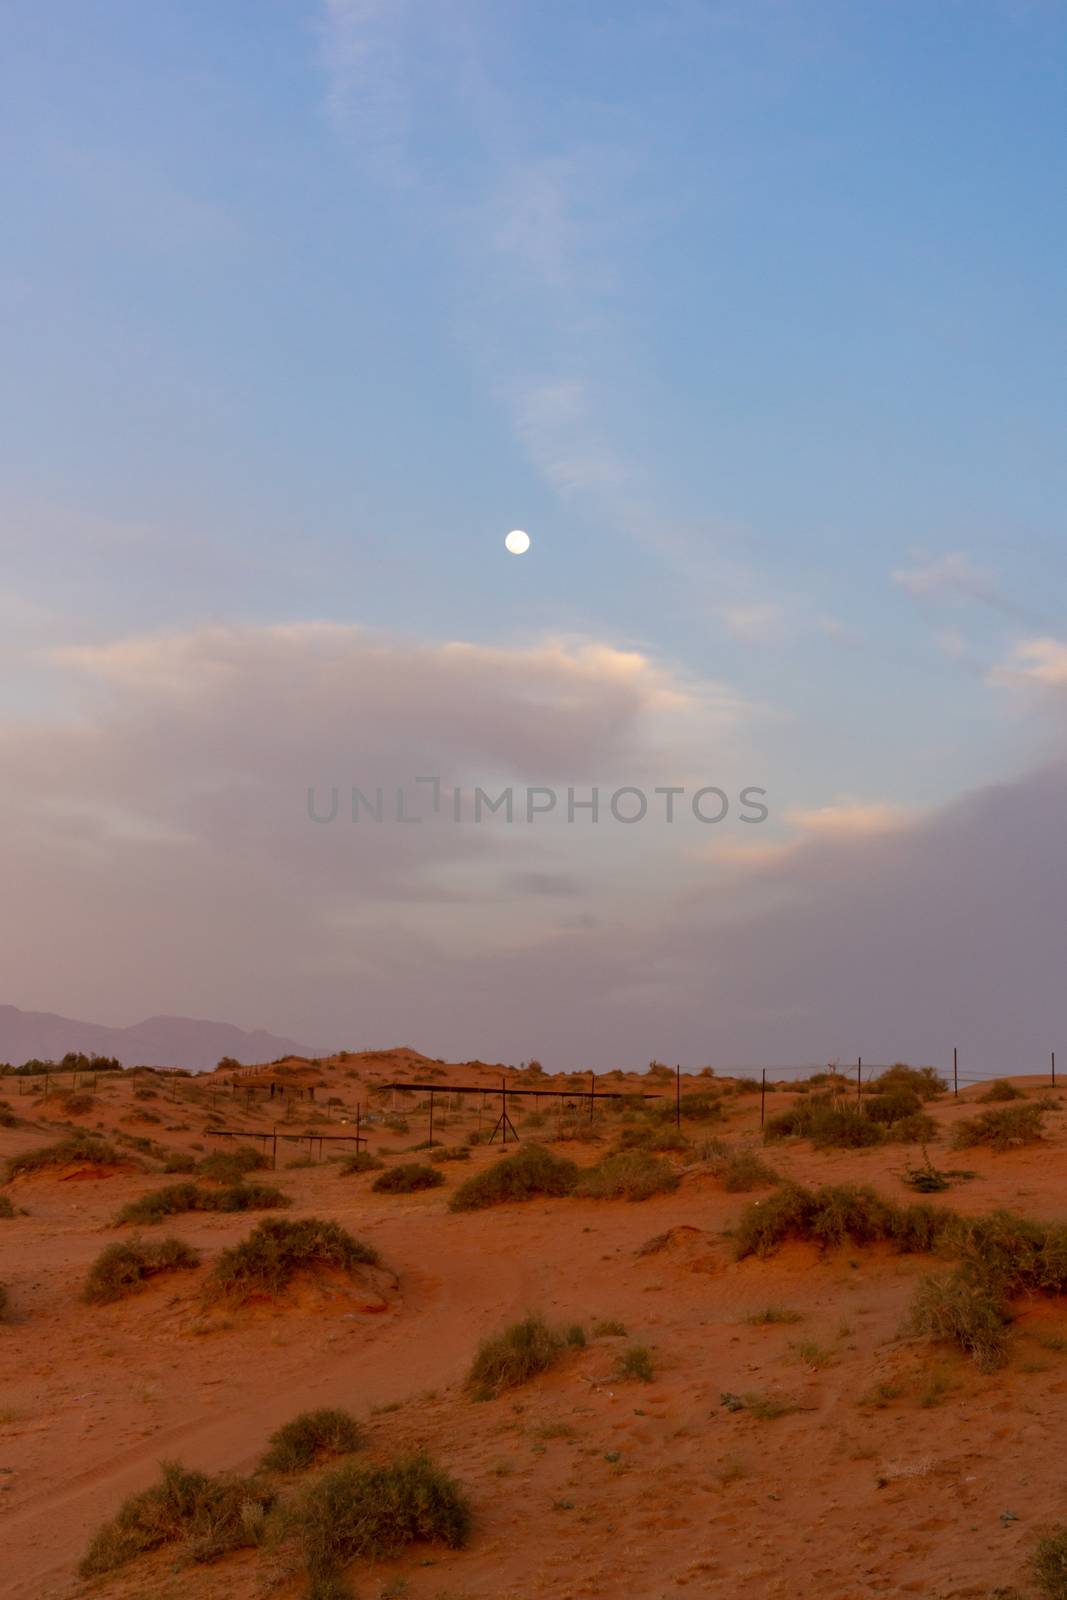 Evening sunset in the desert sand dunes of the United Arab Emirates with a blue sky, clouds, and the moon shining brightly with sunset behind.